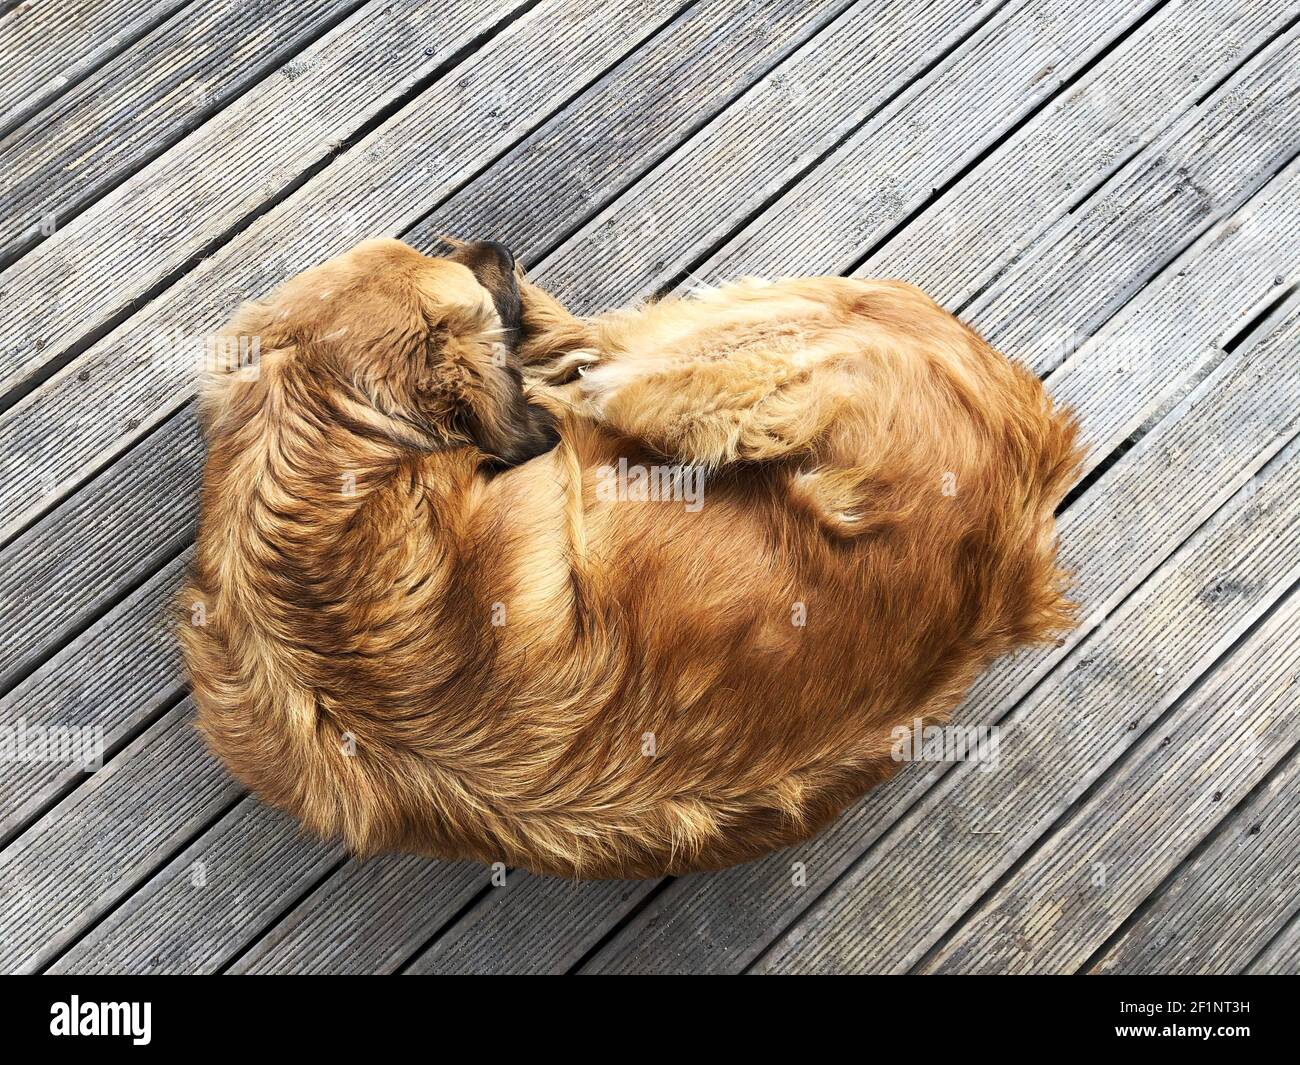 Top view on a gold brown golden retriever sleeping on a wooden floor Stock Photo